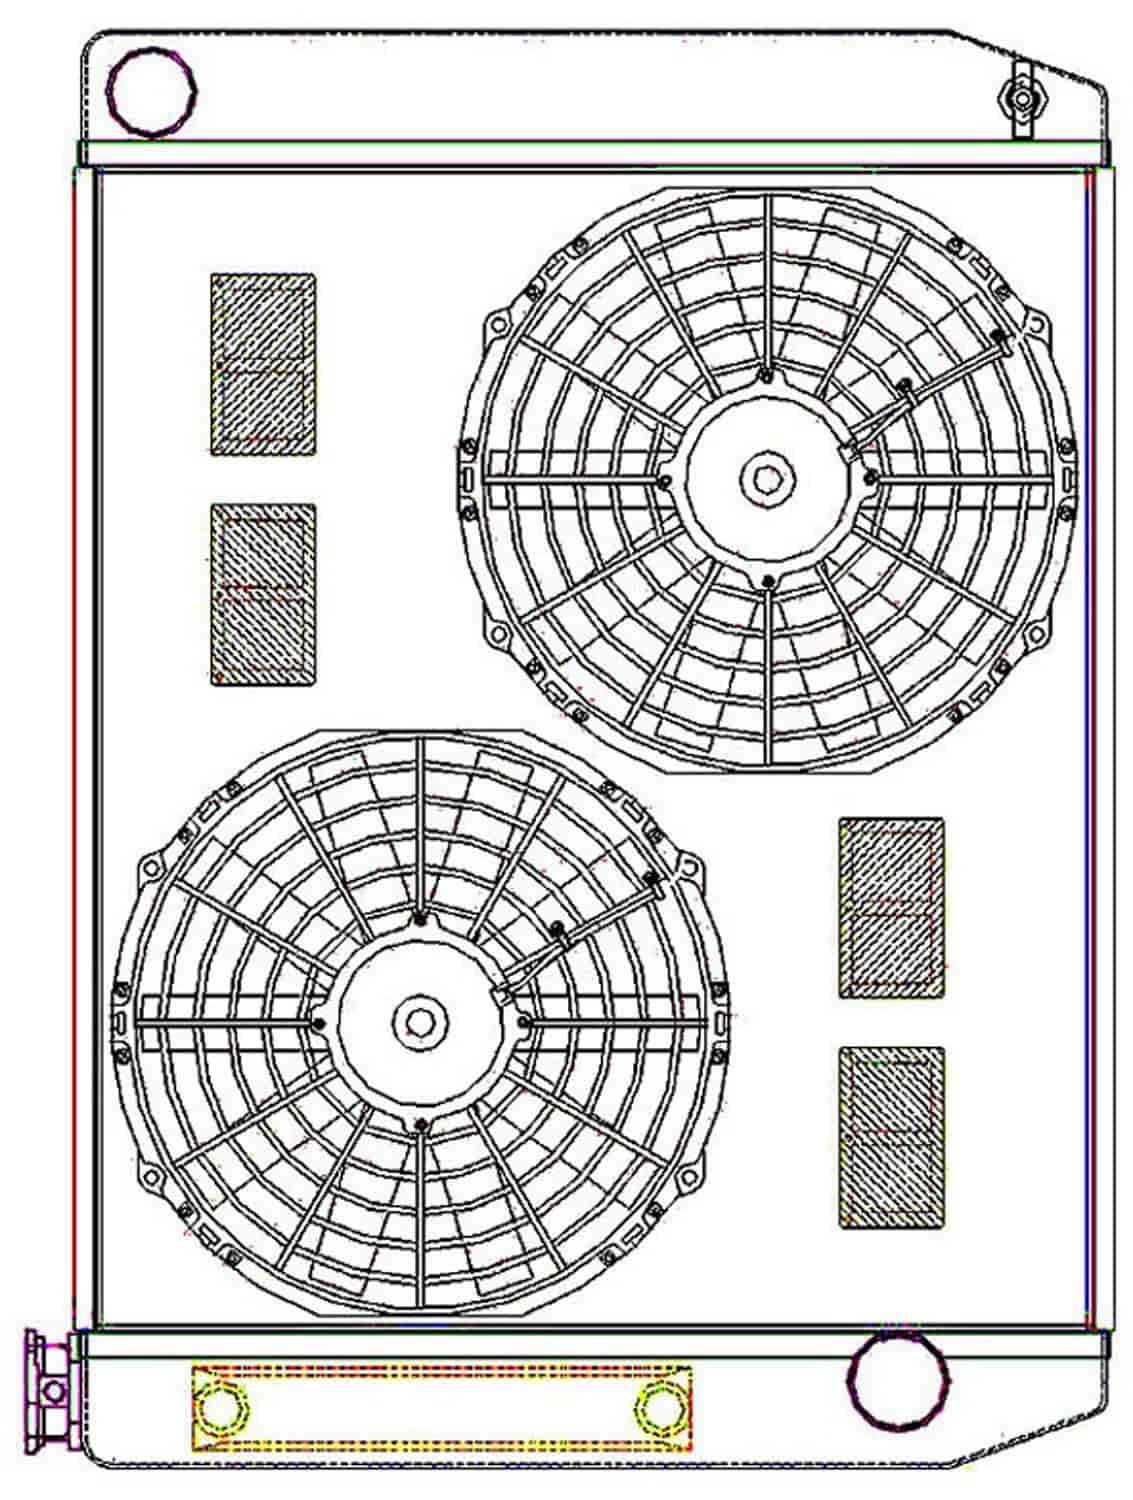 ClassicCool ComboUnit Universal Fit Radiator and Fan Single Pass Crossflow Design 26" x 19" with Transmission Cooler